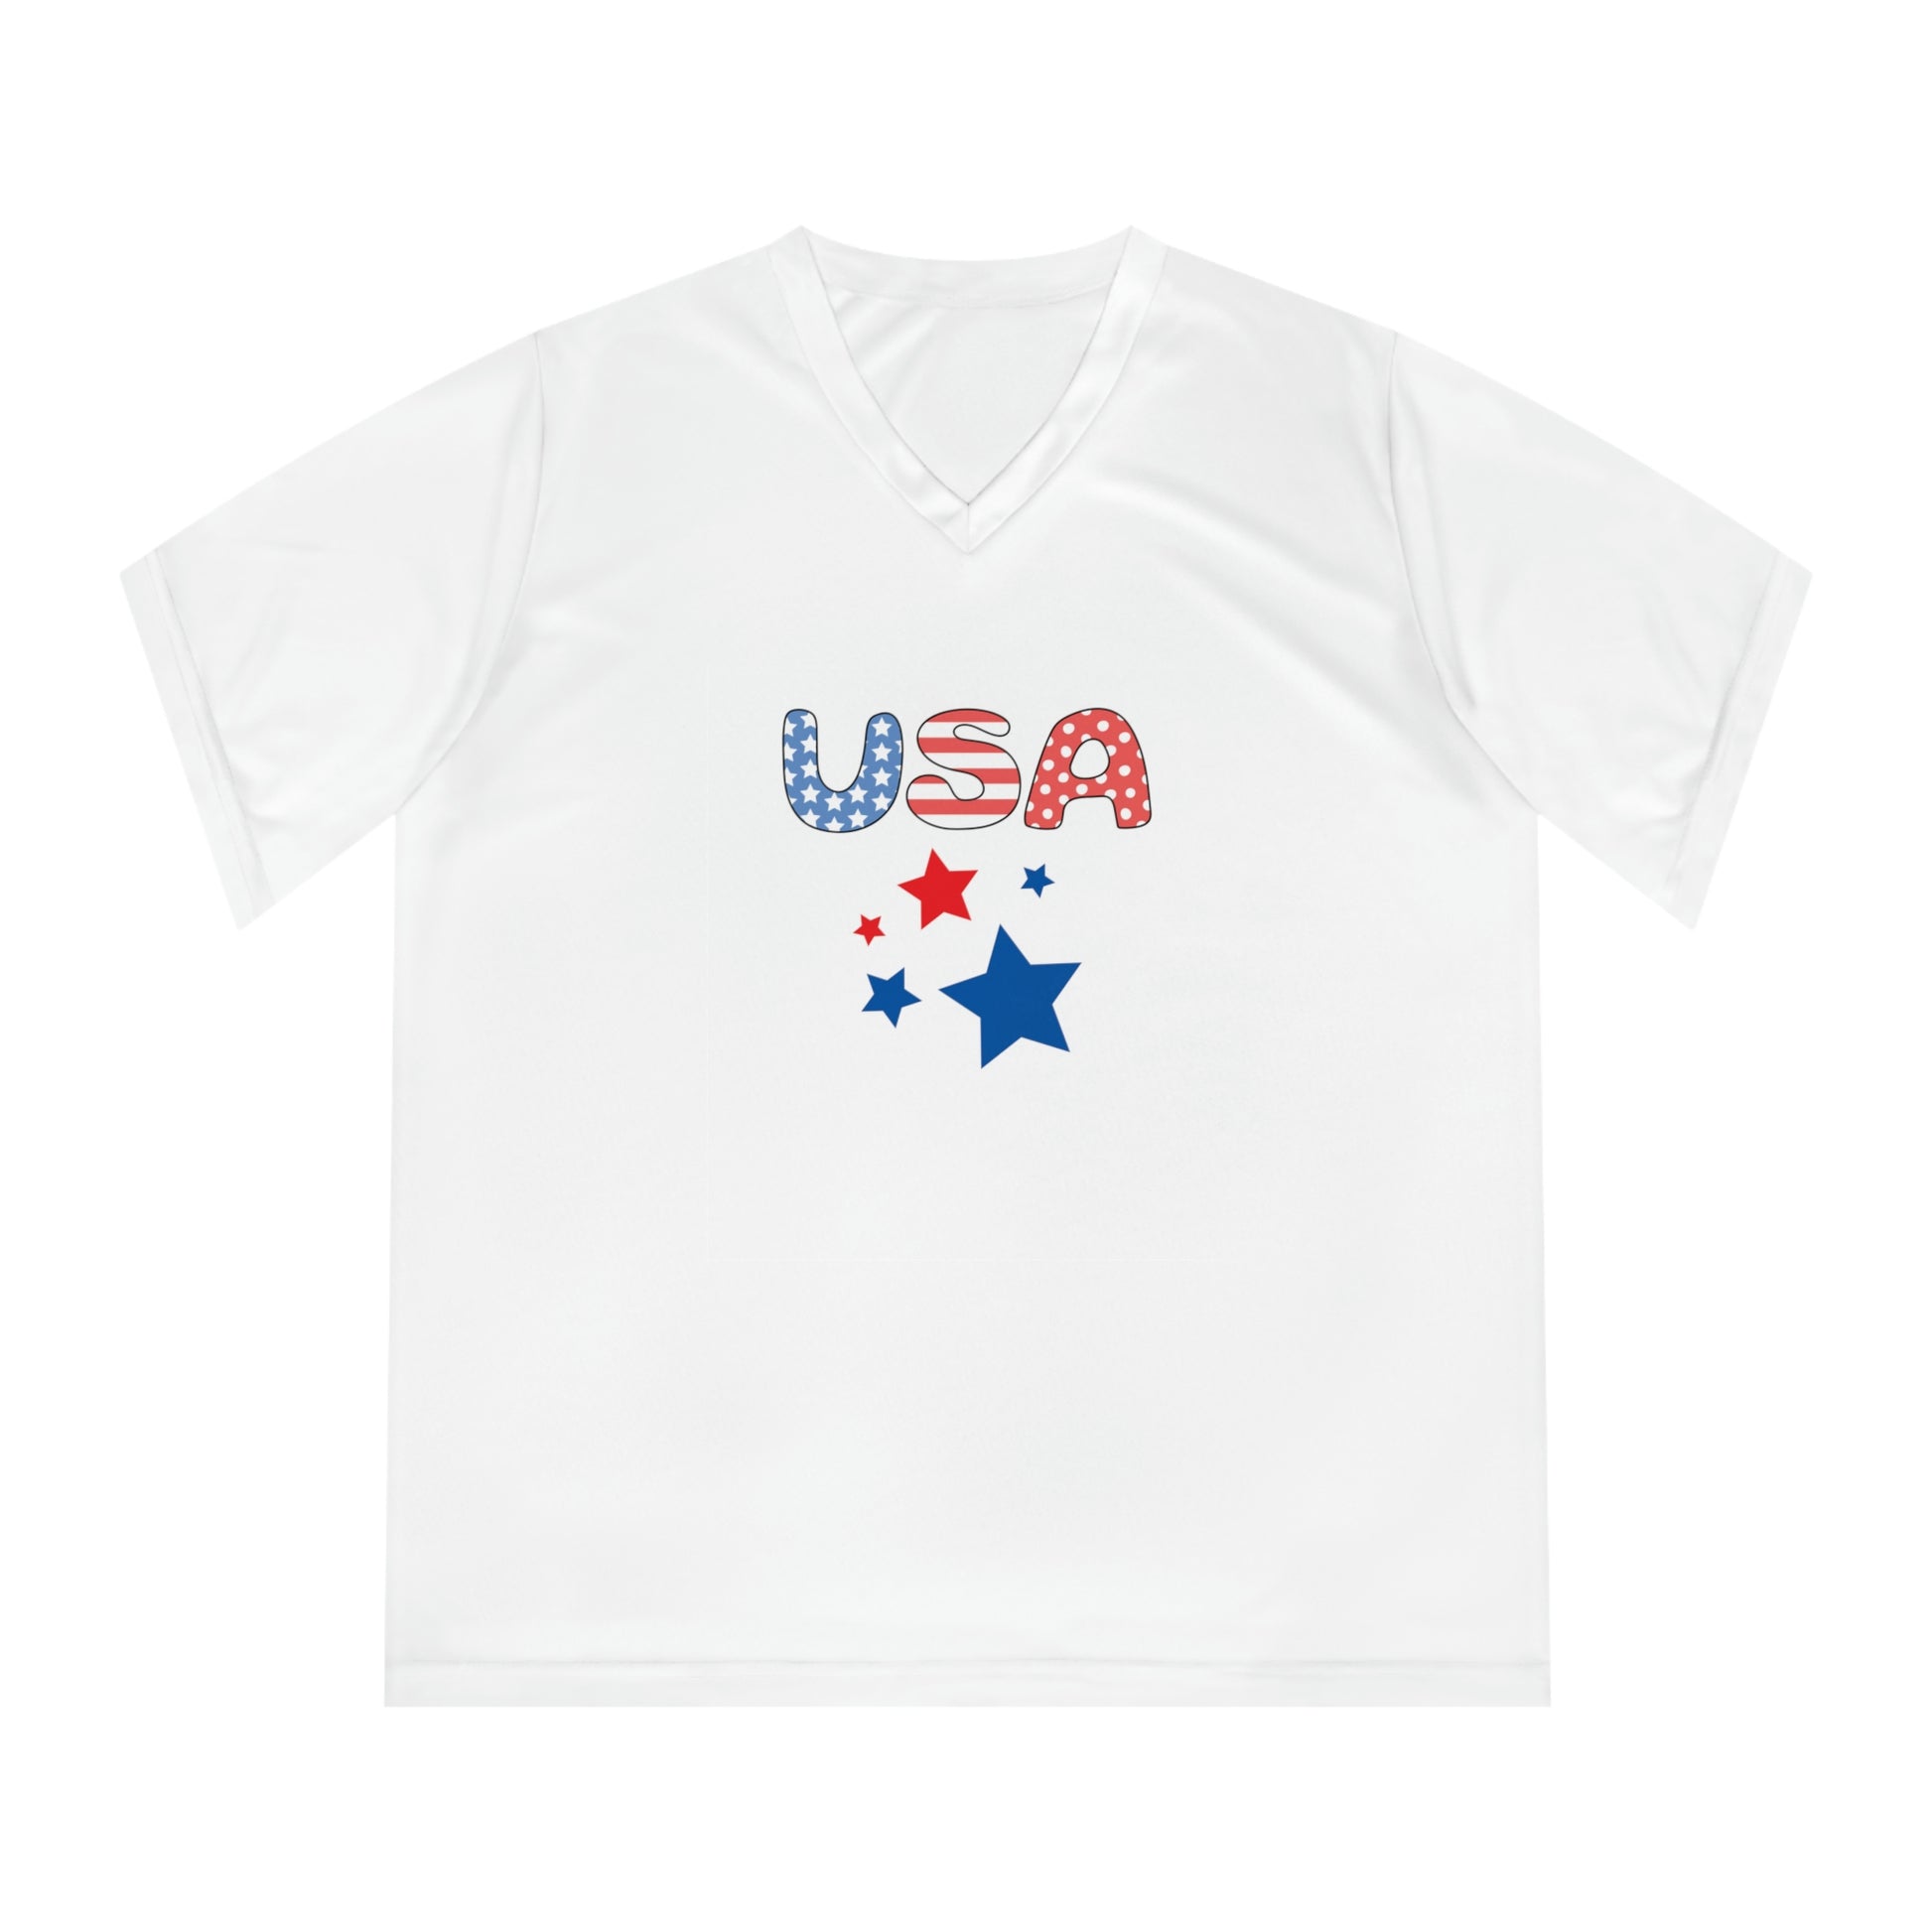 Flat front view of the White t-shirt